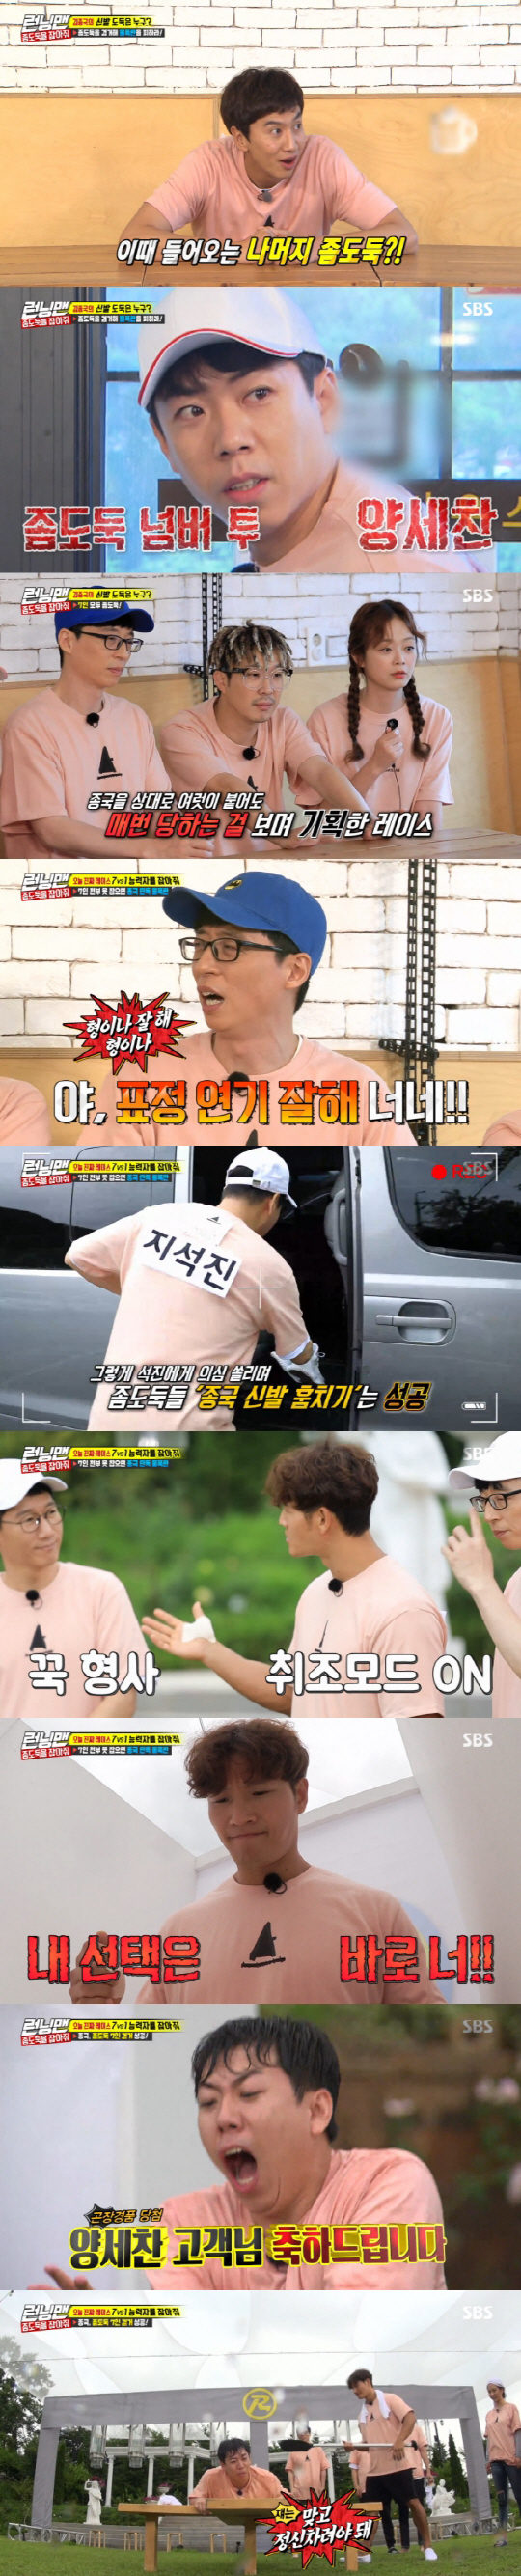 Kim Jong-kook arrested The Little Thief party to avoid water bomb penalties.On SBS Running Man broadcasted on the 29th, the wish of singer Kim Jong-kook was revealed.At the opening, the crew had a breakfast dinner at a limited restaurant for the hard-working cast, but the cast members doubted what the crew continued to lose, saying, Its a prize.Kim Jong-kooks shoes disappeared as he headed to the yard for the real opening.Here, a mission called Get The Little Thief You Stealed unfolded: PD Get me some of The Little Thiefs body hints.If you unanimously arrest The Little Thief, its a success.The arrested Little Thief will carry out water bomb penalties, and on the contrary, all members will receive water bomb penalties when they fail. Running Man members all suspected Ji Suk-jin as a spy, as he was the only one to stand up with a bowl of rice during the meal.Running Man then succeeded in a hint-taking mission with the Bubbling mission, which was a mobile mission; the crew released a photo of the criminal with a slightly black spot on the upper elbow.An elbow search led to another suspicion of Ji Suk-jin.In addition, a Random 5-second Talk mission was given to answer three random questions about members within 5 seconds.Here Haha challenged and said, Why does Kim Jong-kook often go to LA?Haha answered the last third answer, saying, I have a daughter hidden in LA. Kim Jong-kook, who wrote an unfair falsification, said, I suddenly thought I wanted to have a real daughter in LA.Then I will go to see you every day... Then Ji Suk-jin laughed, Do you have a real daughter?, and Kim Jong-kook responded, Give me your shoes, causing a laugh.A photo of The Little Thiefs body features has been released since the throwing away from the shoes pocket mission.Hints showed The Little Thief had clean hairless legs - as well as The Little Thiefs wrists were thick, narrowing to men.Everything was in a situation where it fits in with Ji Suk-jin.Get The Little Thief last mission was a punch quiz - the hand of the woman signing here was the hand of the woman.In the opening, Kim Jong-kook told Jeon So-min: Why give me flowers, not the one who gives me flowers, not the one who gives me.Why did you try to sit next to me? An anecdote about an hour before the shoot was released here, and it turns out that all members except Kim Jong-kook were released as The Little Thief.The crew said, Even if it was 2-1, 3-1, I did not win Kim Jong-kook.This time, we gave him the opportunity to catch Kim Jong-kook, a talented person with a 7-1 lead. However, the production team explained, Kim Jong-kooks shoes are relayed one by one.It is a success if you move down one by one after putting it on the top of the shoe field and move to the car. The Little Thief had been suspected of being one, but as all members were members of The Little Thief, the main characters in the photographs were identified as different members.Kim Jong-kook, who has become increasingly strange, said, I do not think this is one person. He said, I do not talk too much.I thought, Murder, when I was doing She Wrote, did not you say that Ji Suk-jin is all if it is not one of my brothers? The members were embarrassed and did not know what to do.In the end, Kim Jong-kook succeeded in arresting the criminal of The Little Thief 7 with sharp Murder, She Wrote power.All seven members were penalized for water bombs. Yang Se-chan won the Gongjang penalty.